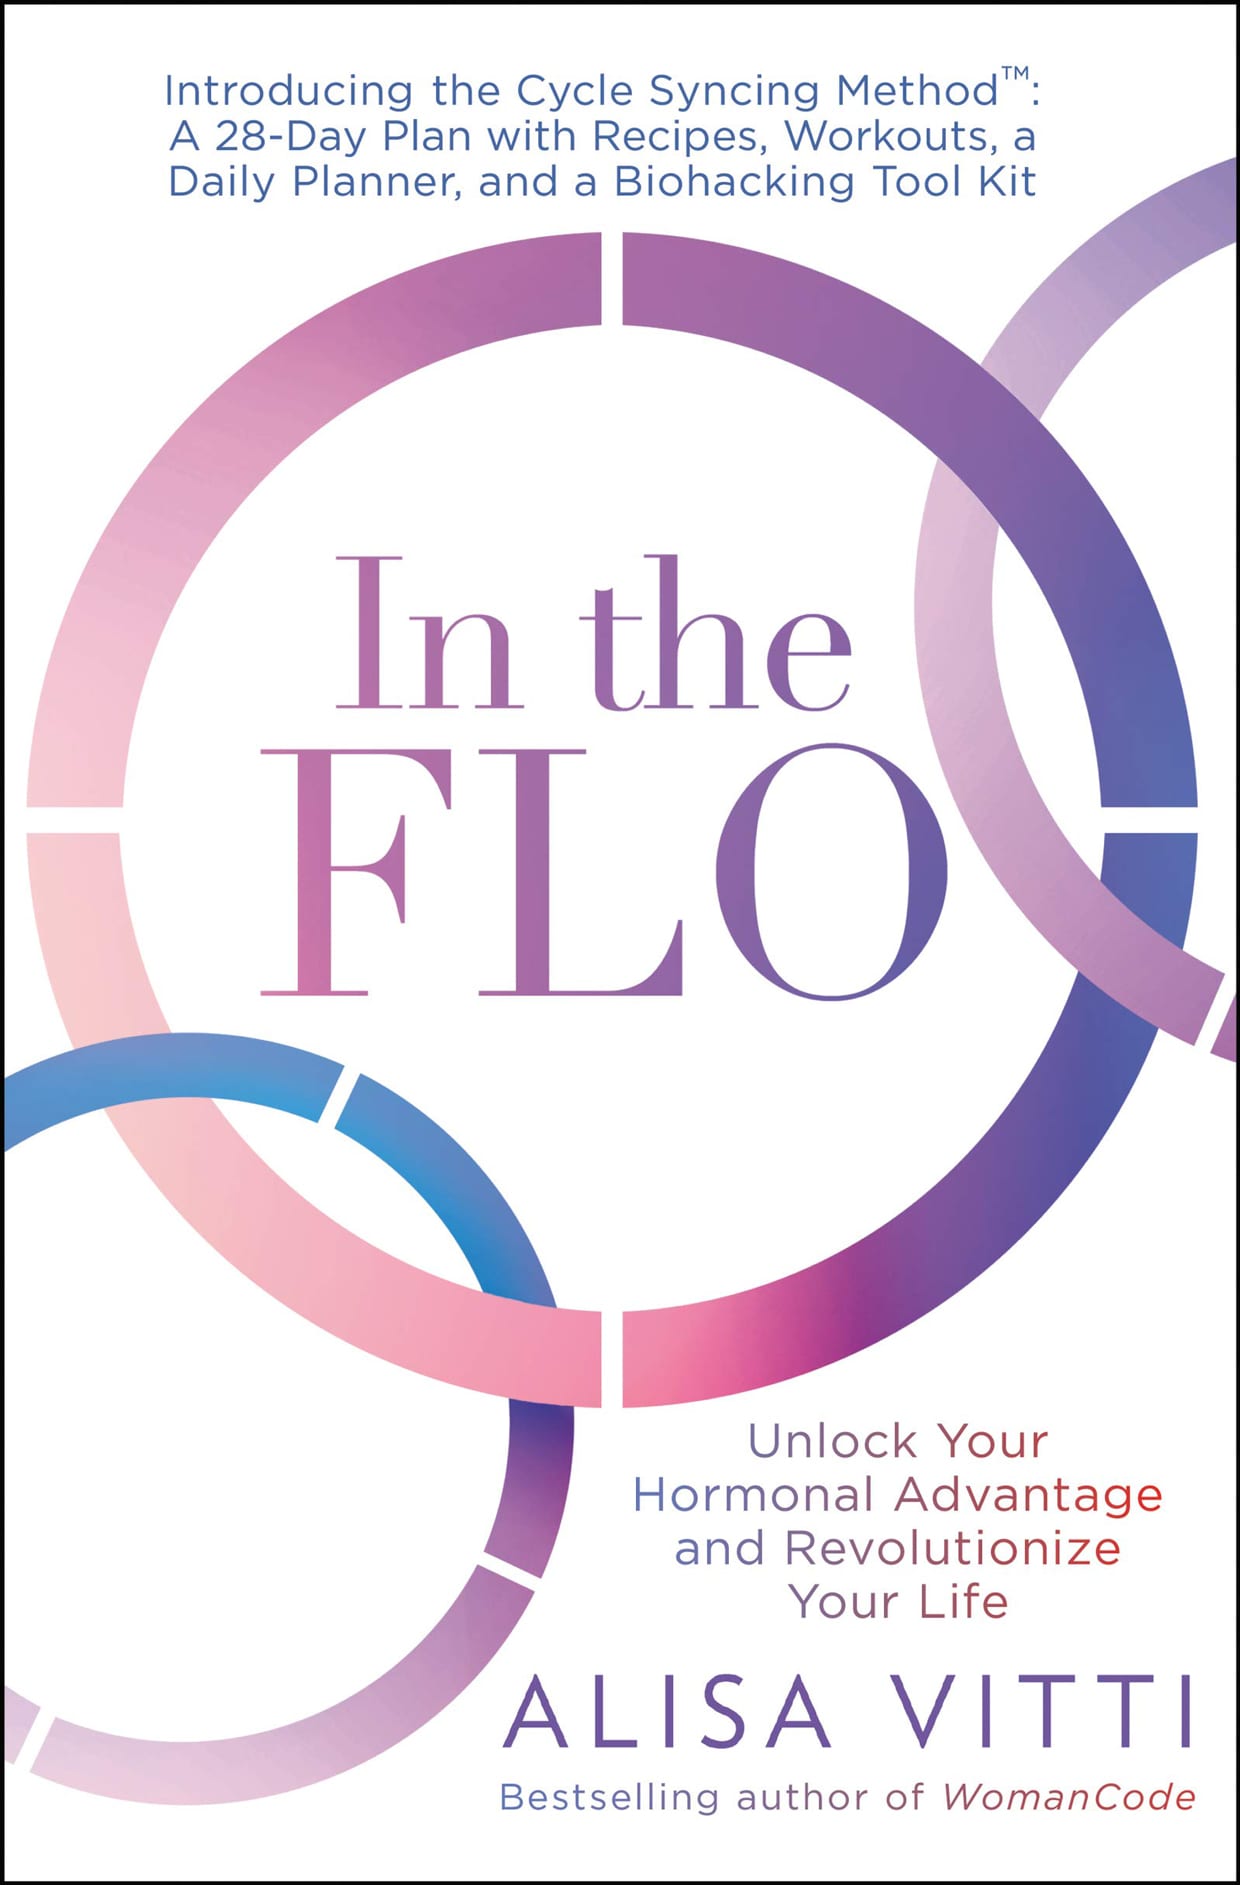 'In the FLO: Unlock Your Hormonal Advantage and Revolutionize Your Life' book cover.